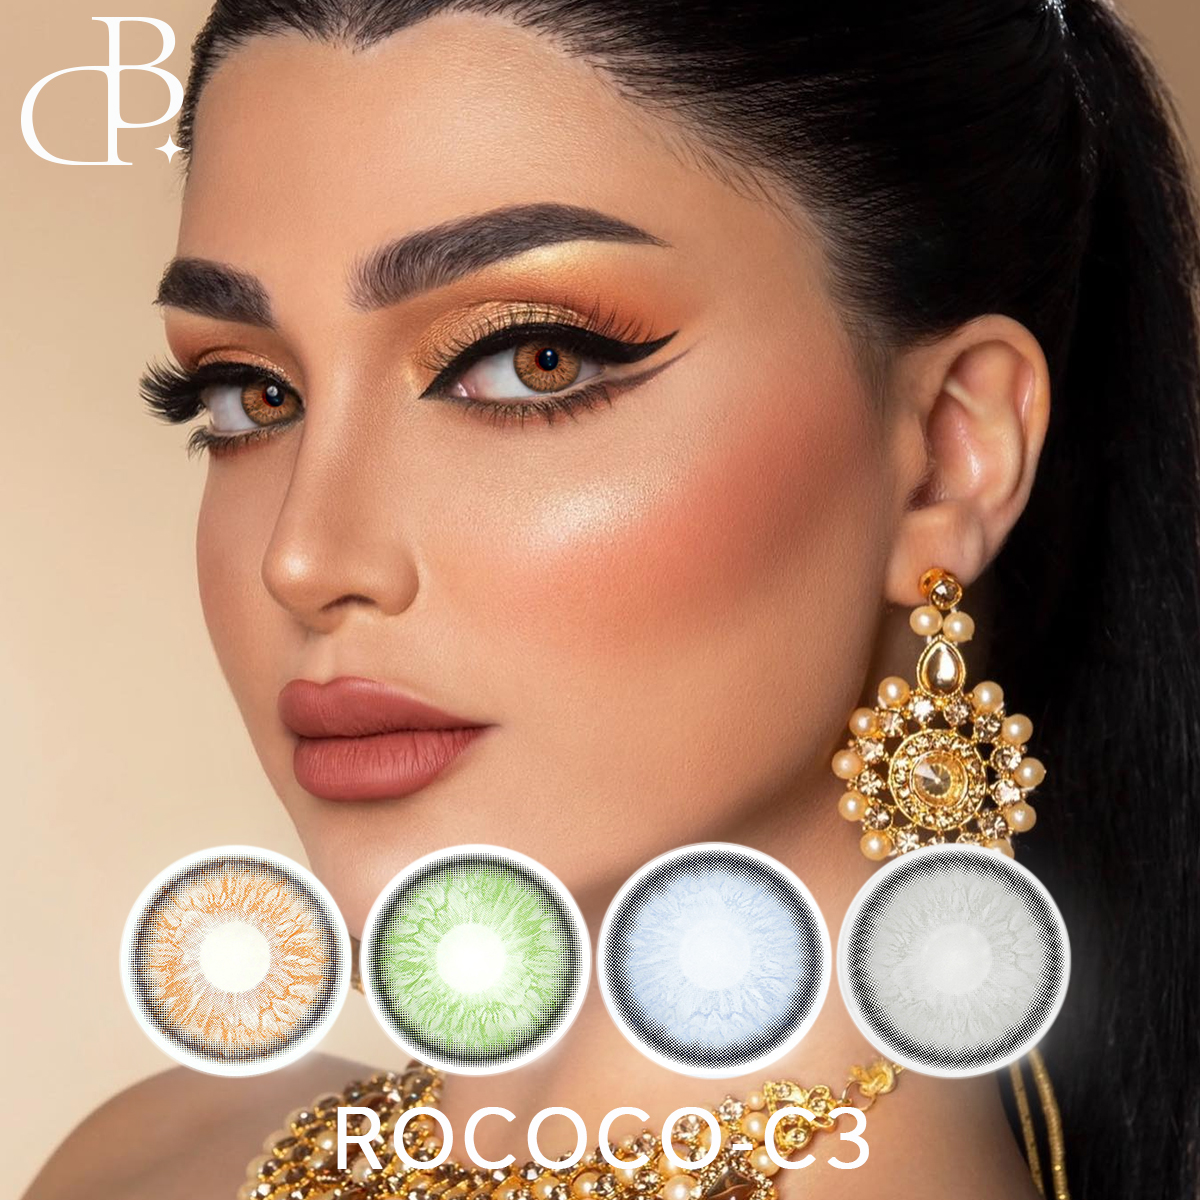 https://www.dbleses.com/rococo-3-new-looking-cosmetic-wholesale-color-contact-lens-cheap-soft-yearly-eye-colored-contact-lenzen-product/